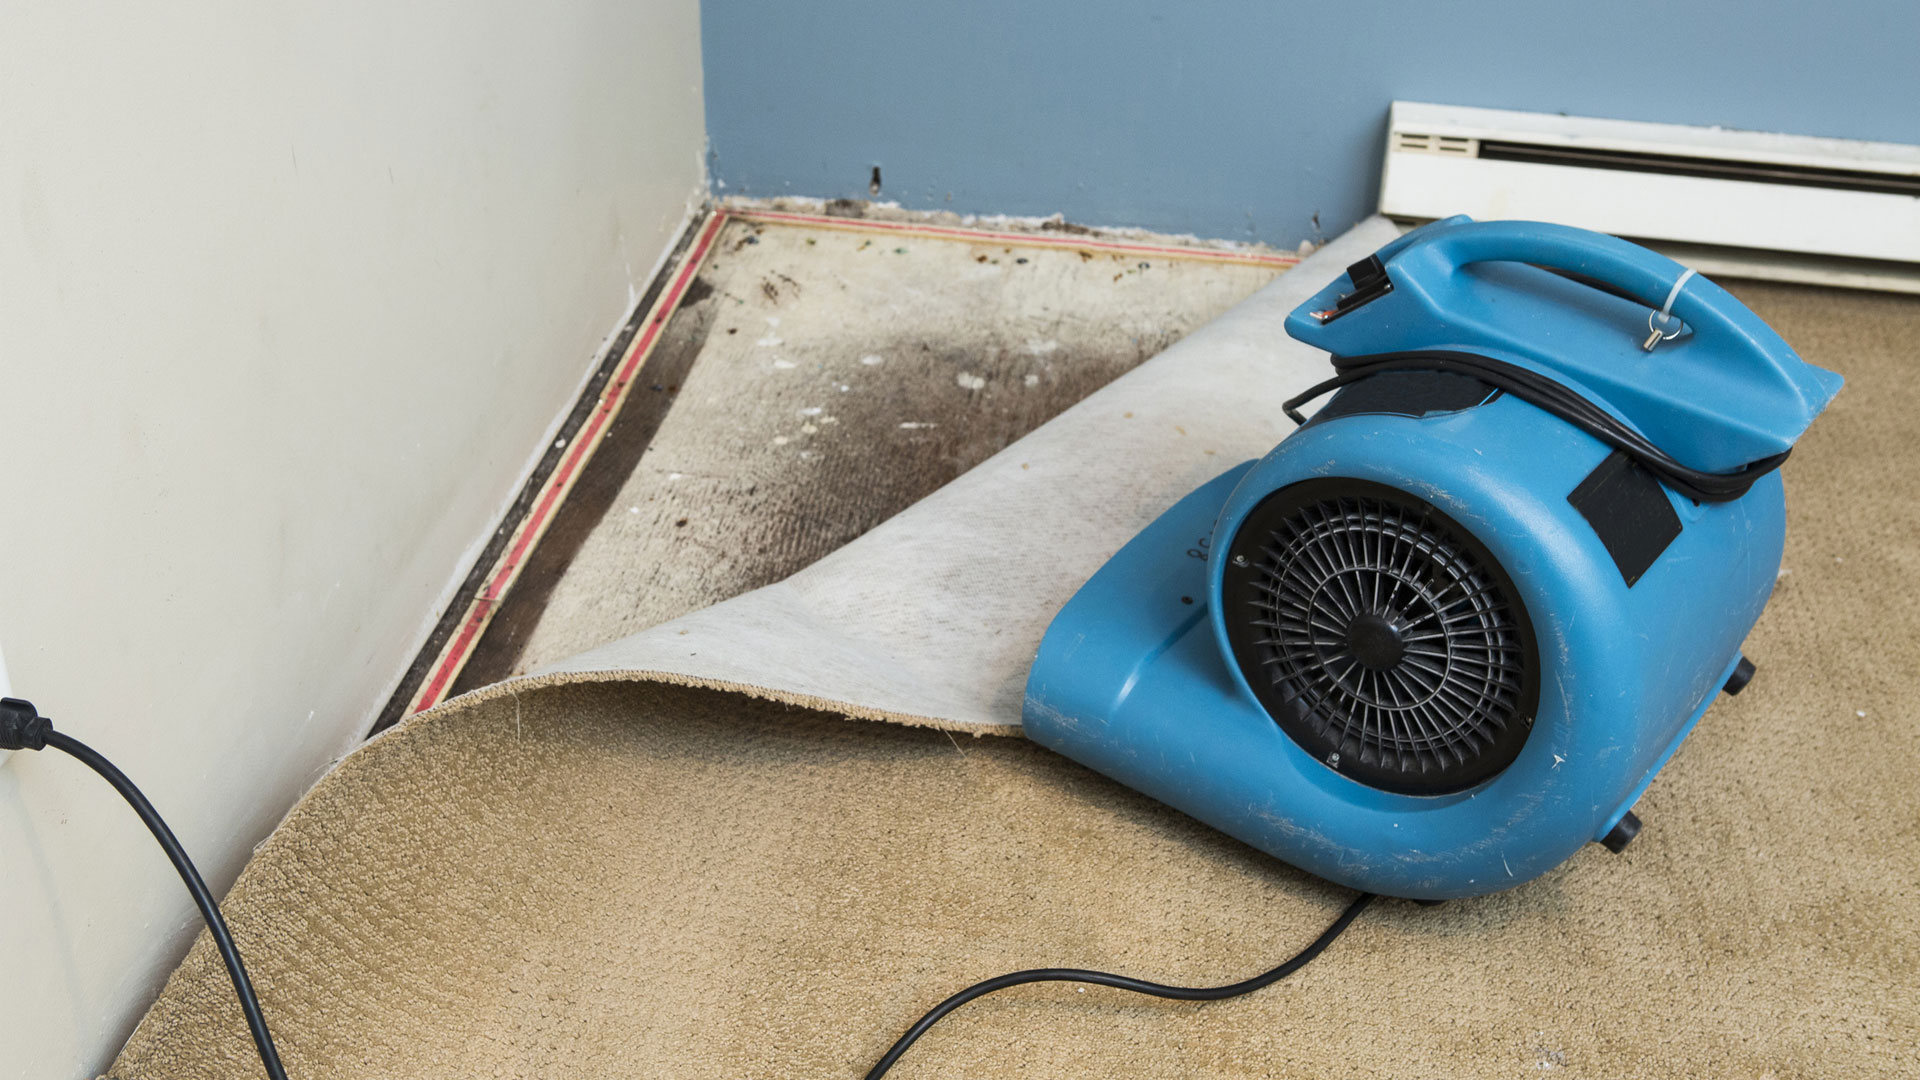 How to remove carpet mold: Image shows humidifier and carpet